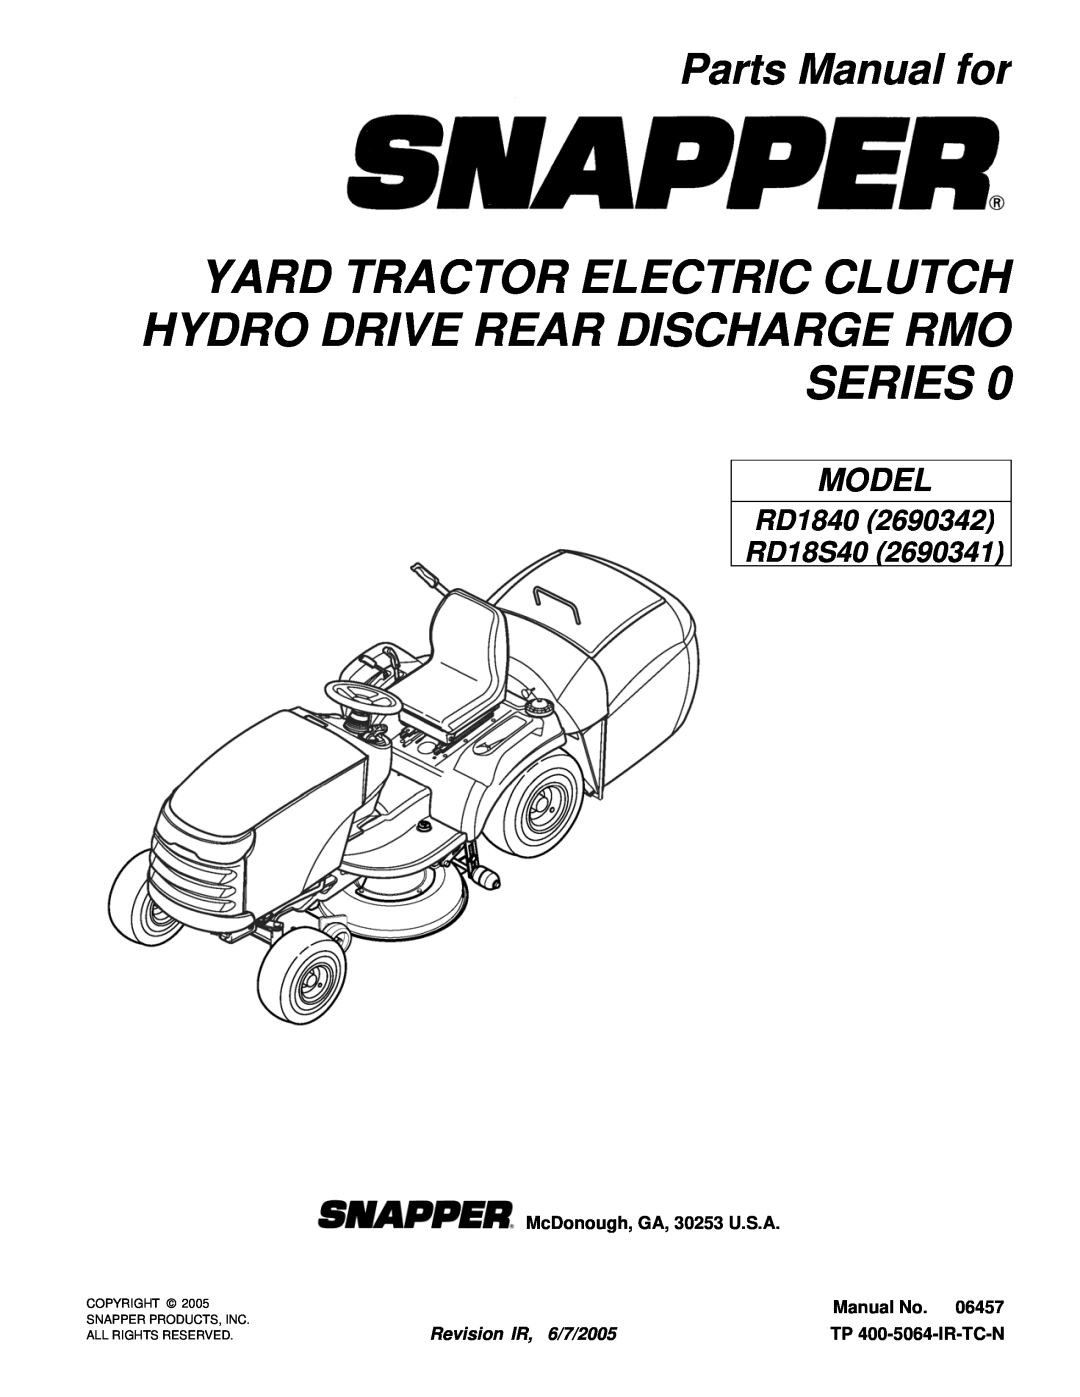 Snapper RD18S40 (2690341), RD1840 (2690342) manual Yard Tractor Electric Clutch Hydro Drive Rear Discharge Rmo Series 